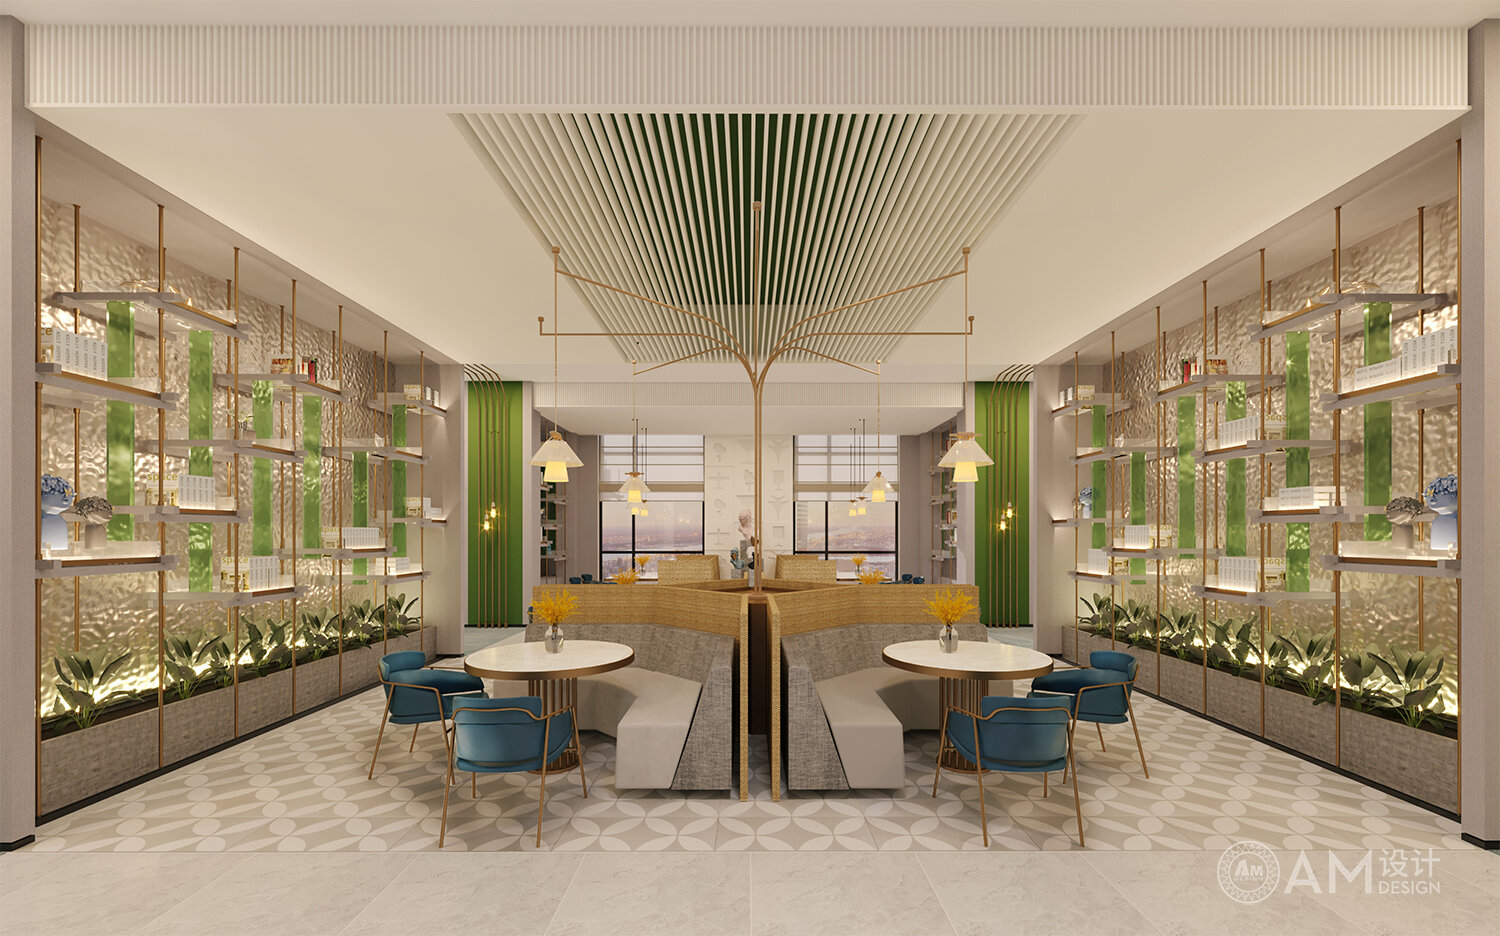 AM DESIGN | Design of dining area of Jianguo Hotel in Weinan, Shaanxi Province